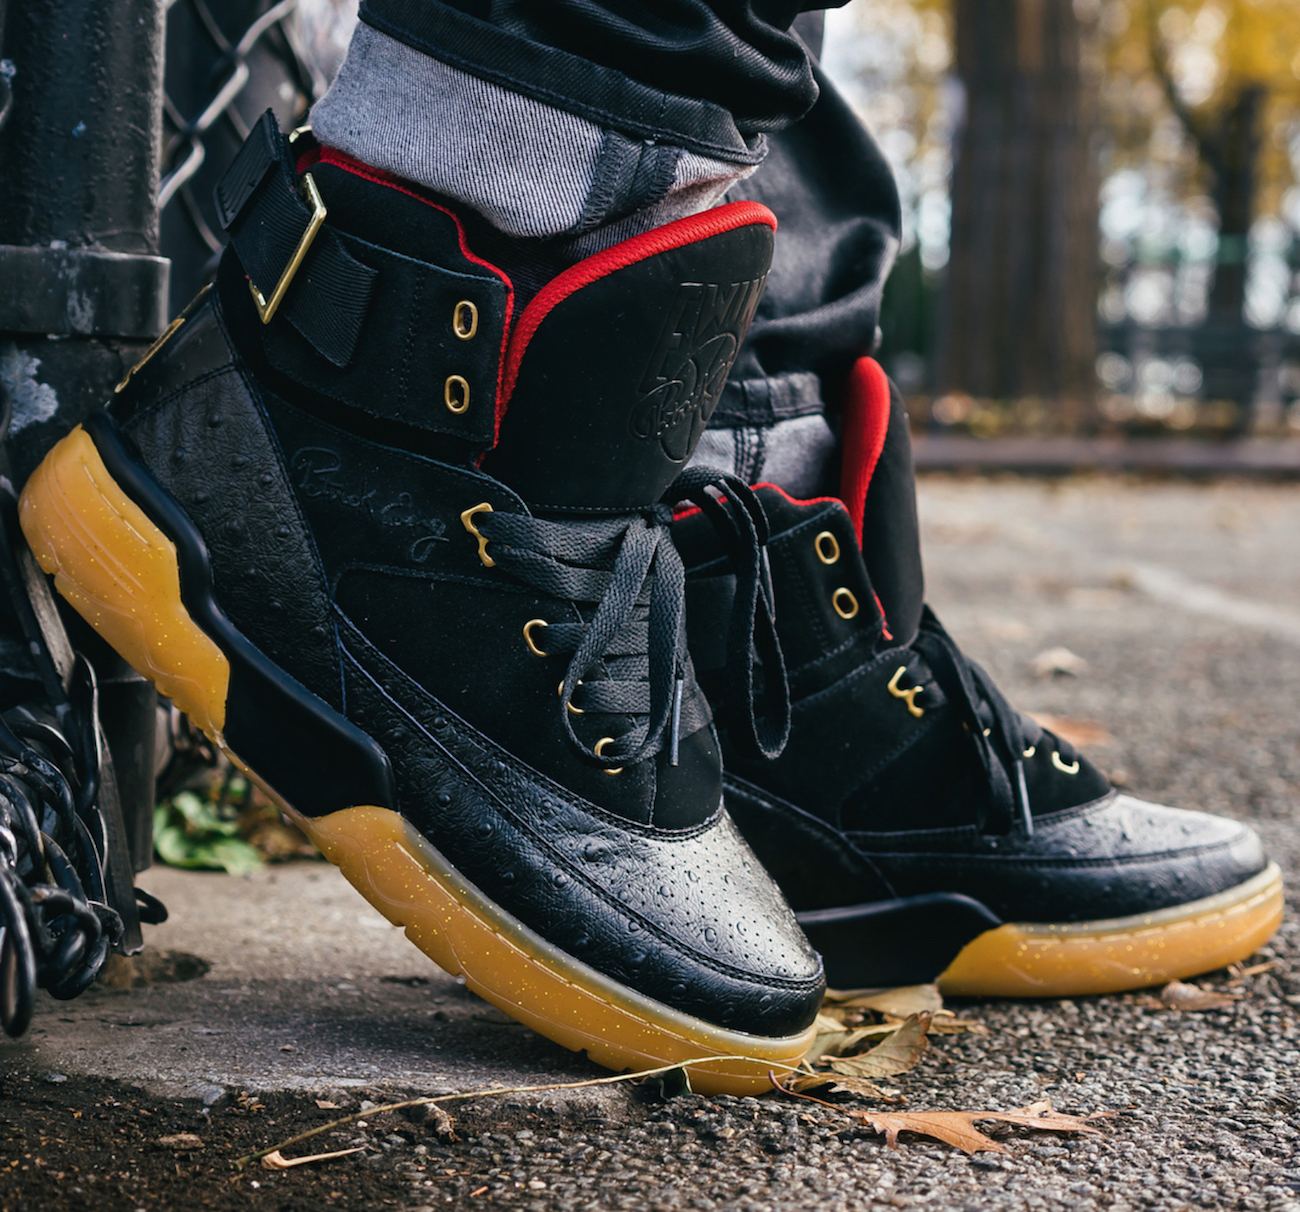 Rick Ross' Latest Sneaker, a Premium Ewing 33 Hi, Has Been Unveiled ...